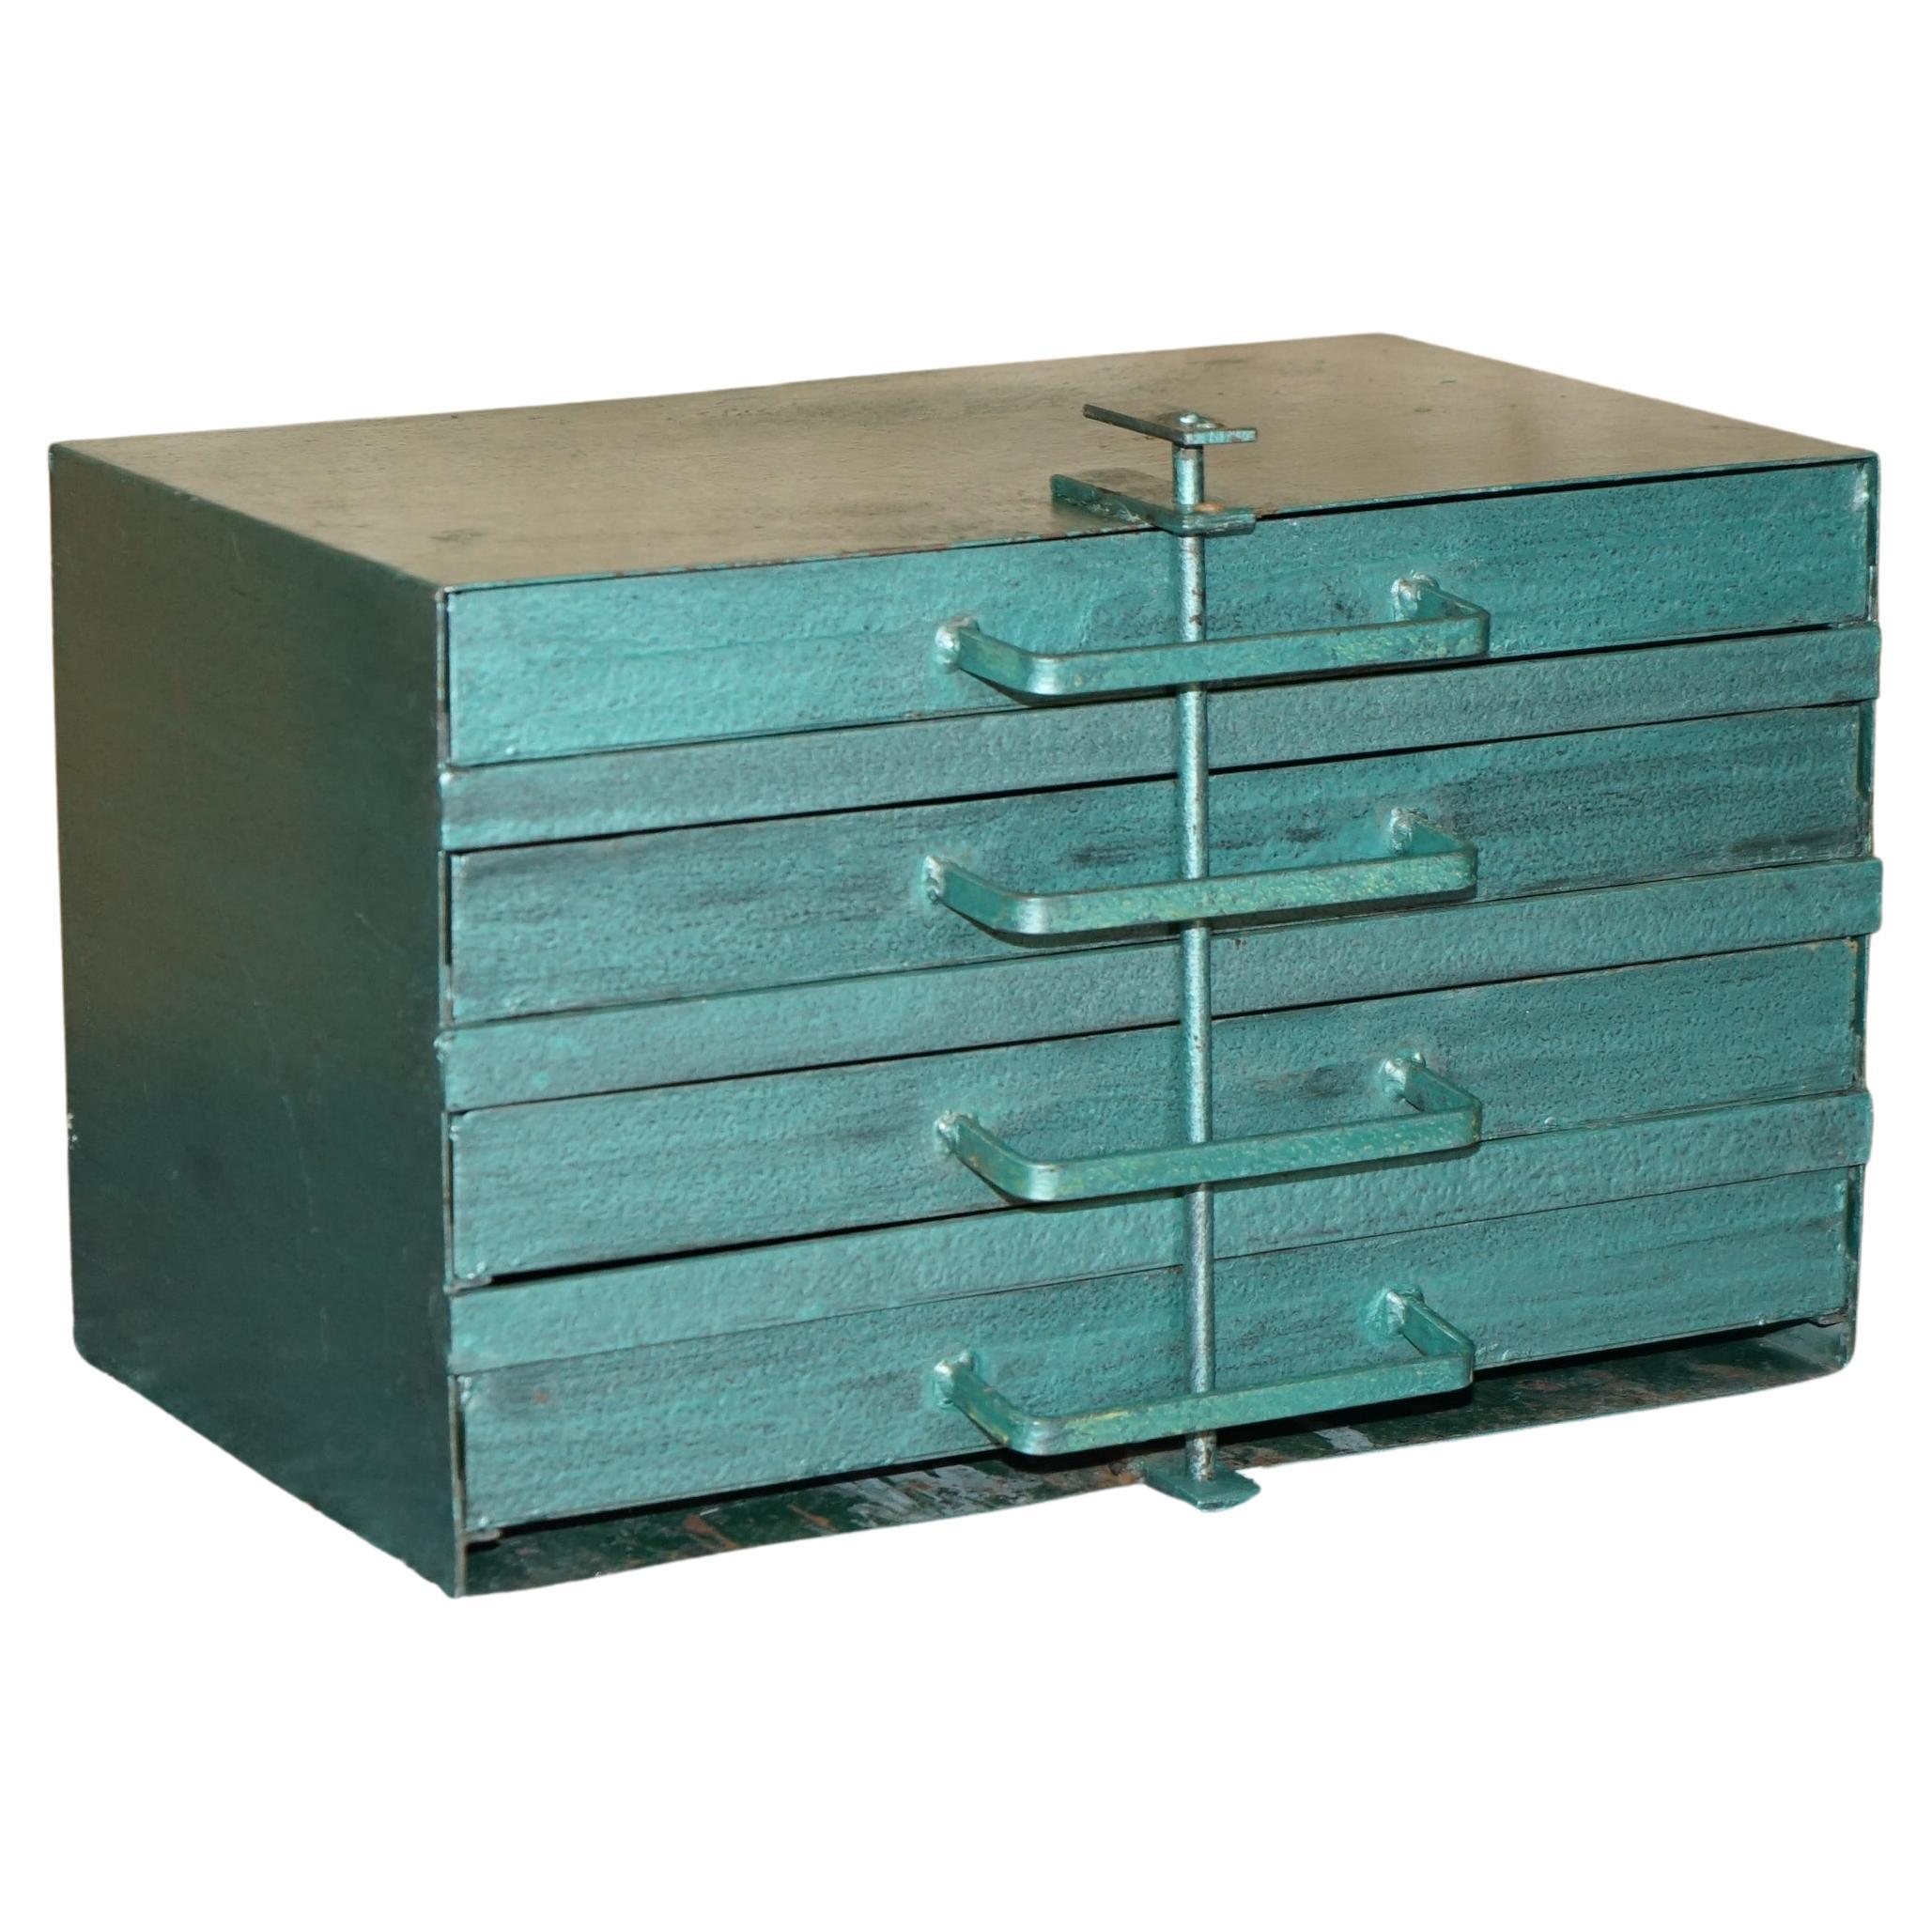 ANTIQUE CIRCA 1920's TEAL COLOURED LOCKABLE MACHINIST WORK TOOL BOX WITH LOCK For Sale